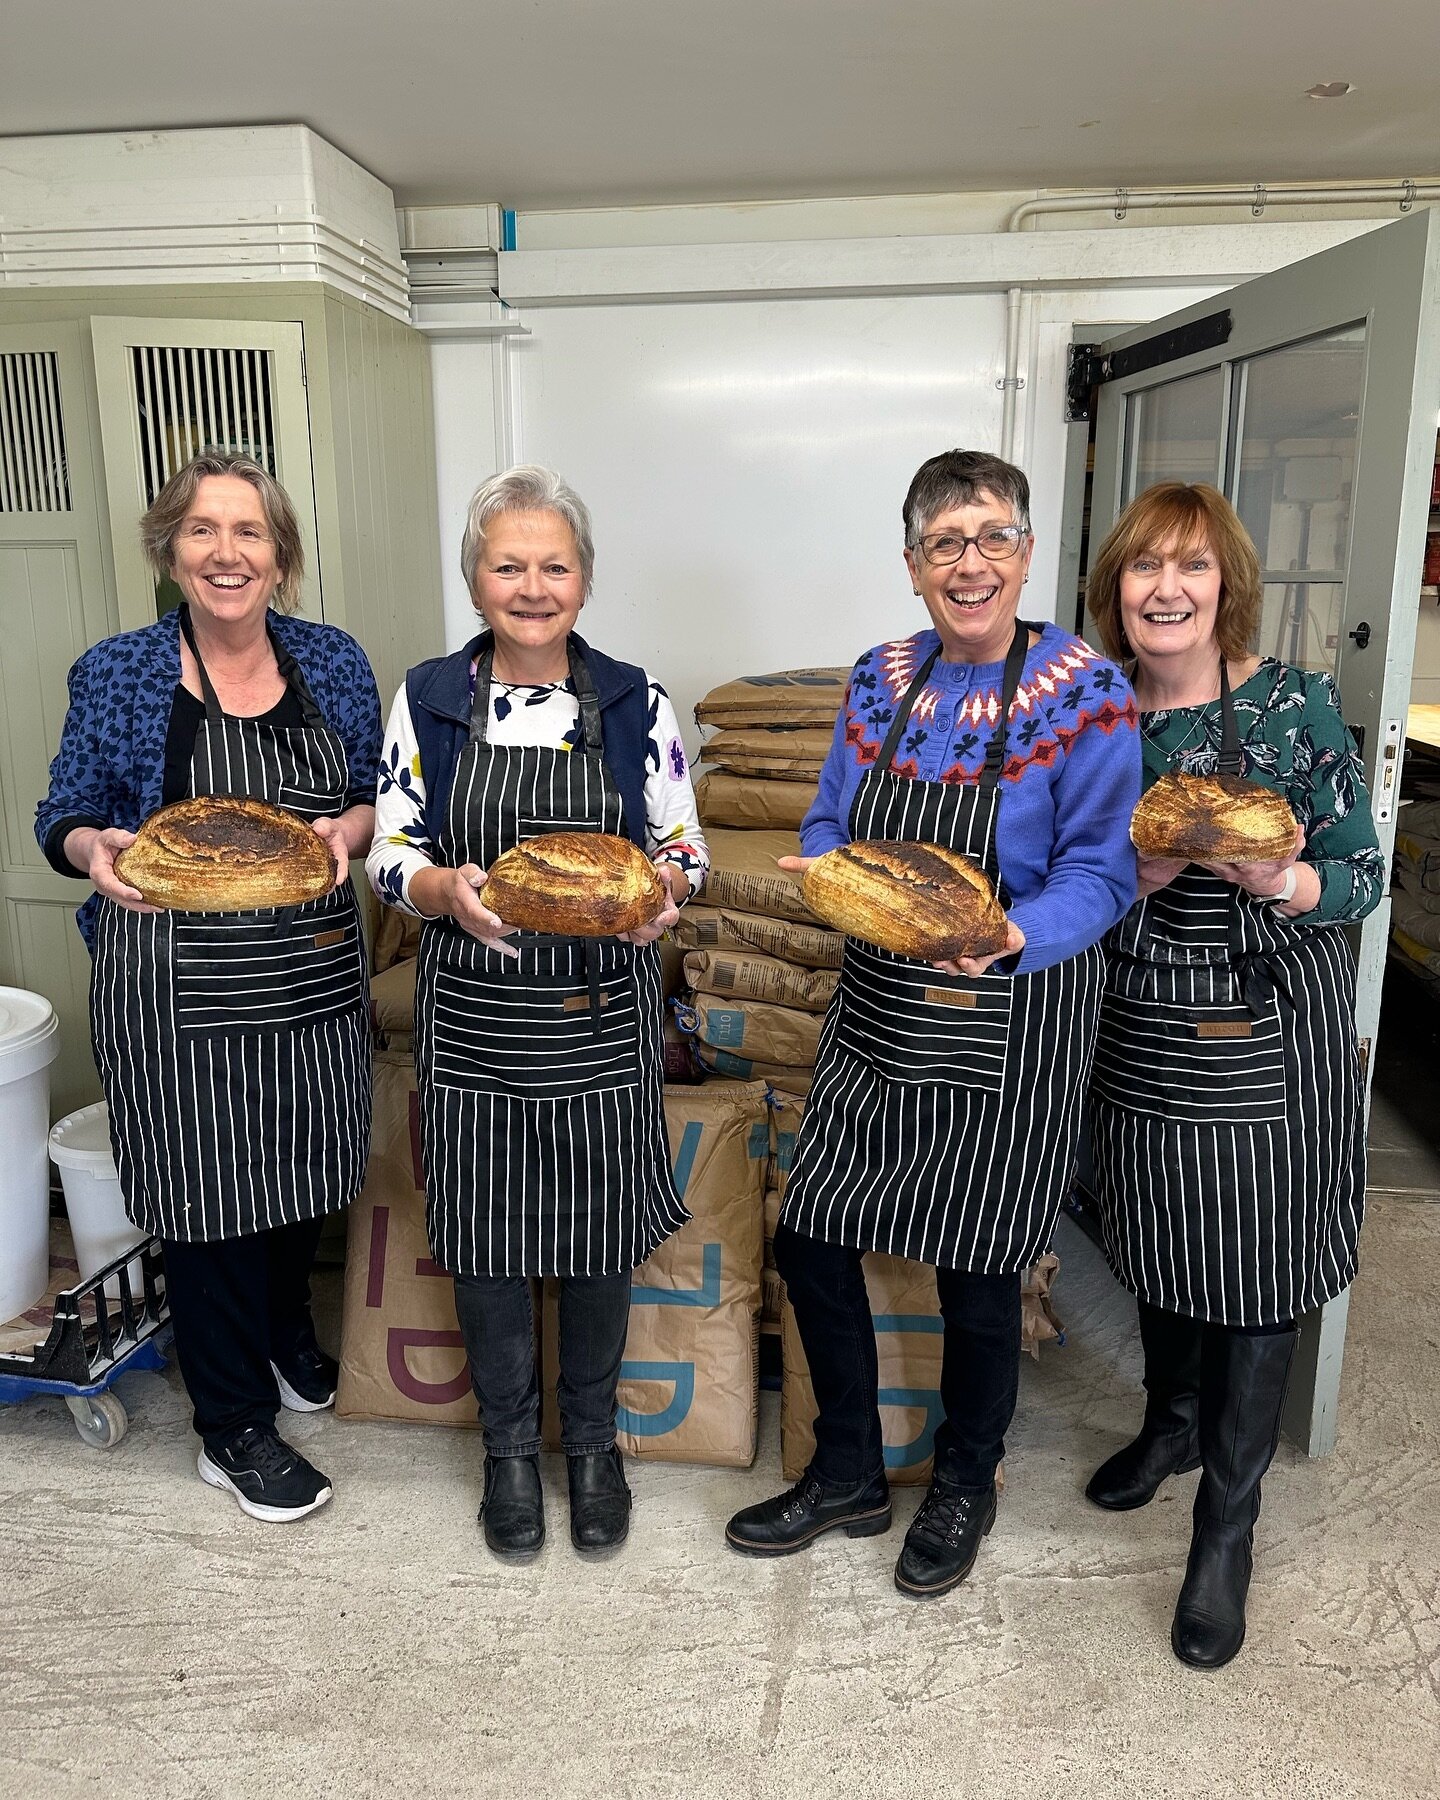 Say &ldquo;Sourdough!&rdquo; 🥖 It was SUCH a pleasure to have Pauline, Gillian, Laura, and Susan join us for a bread masterclass! With @wildfarmed flours cheekily photobombing 📸

We still have a few classes available and LIMITED weekend days for Sp